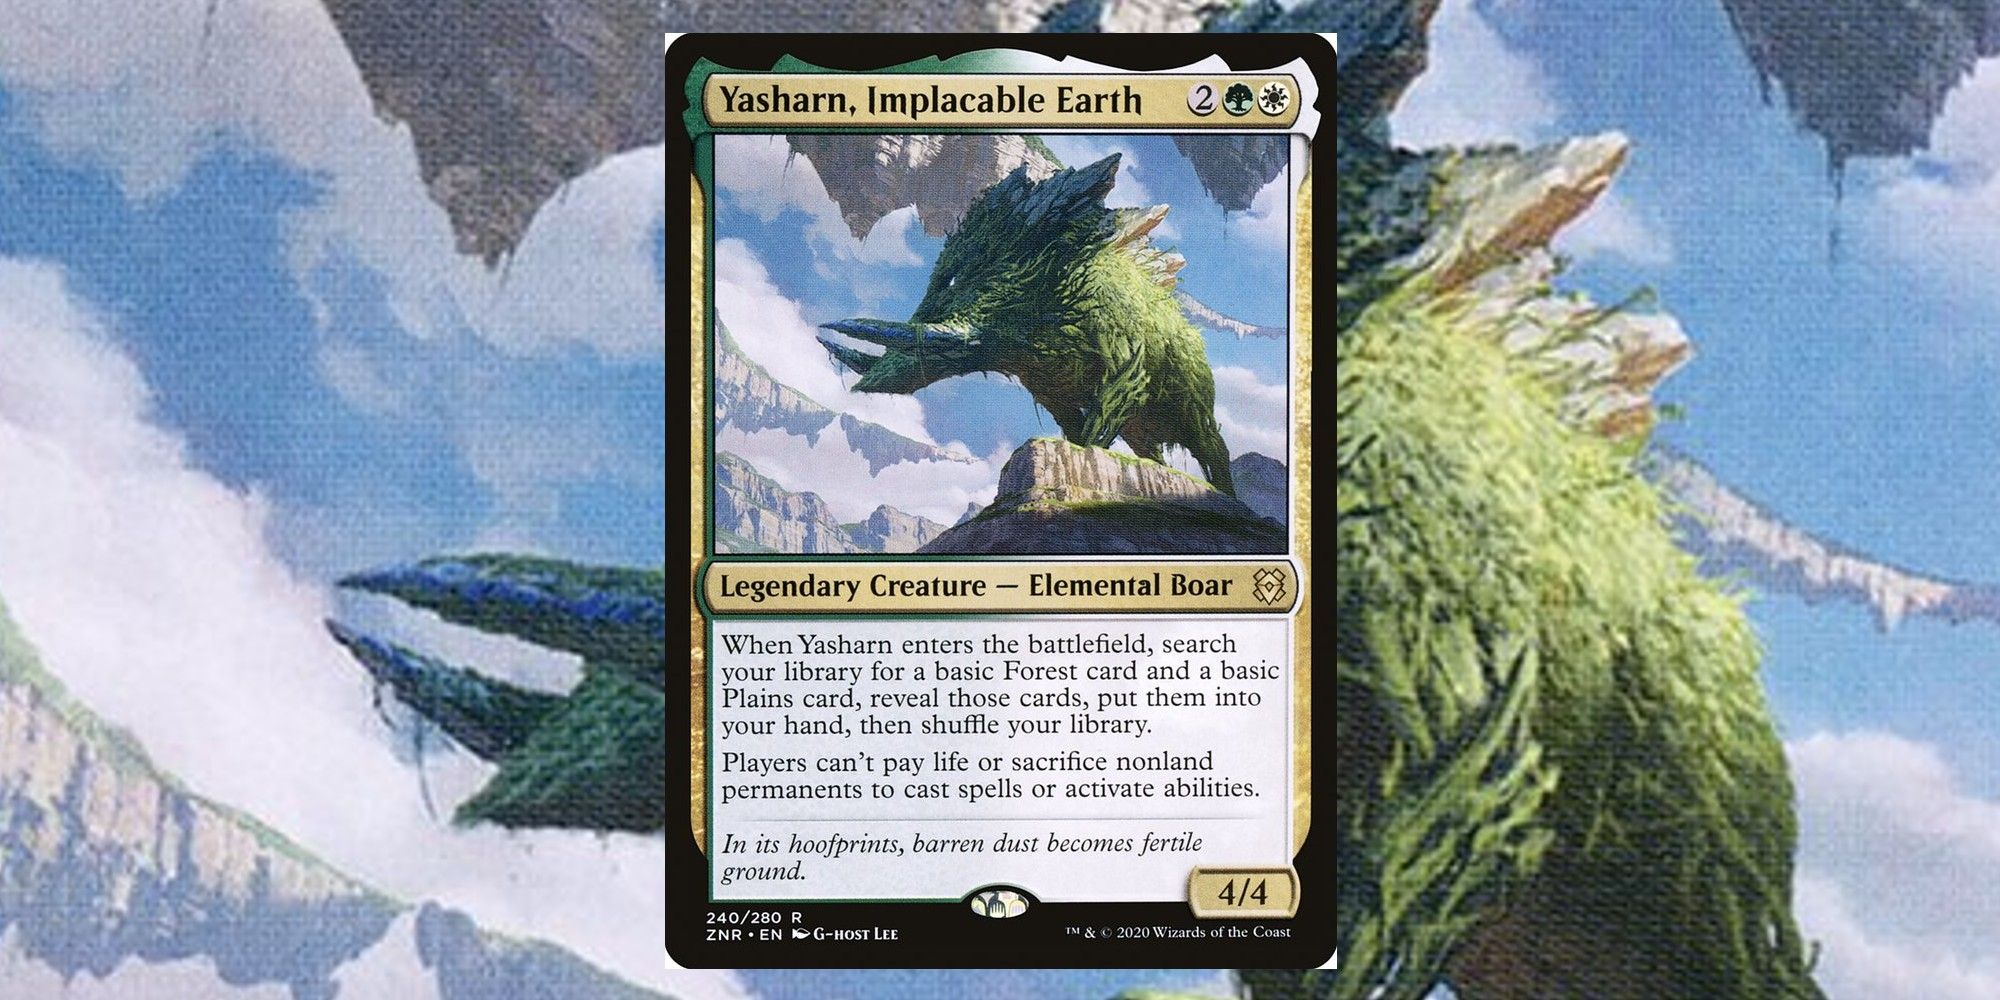 Yasharn, a large beast, standing on a cliff